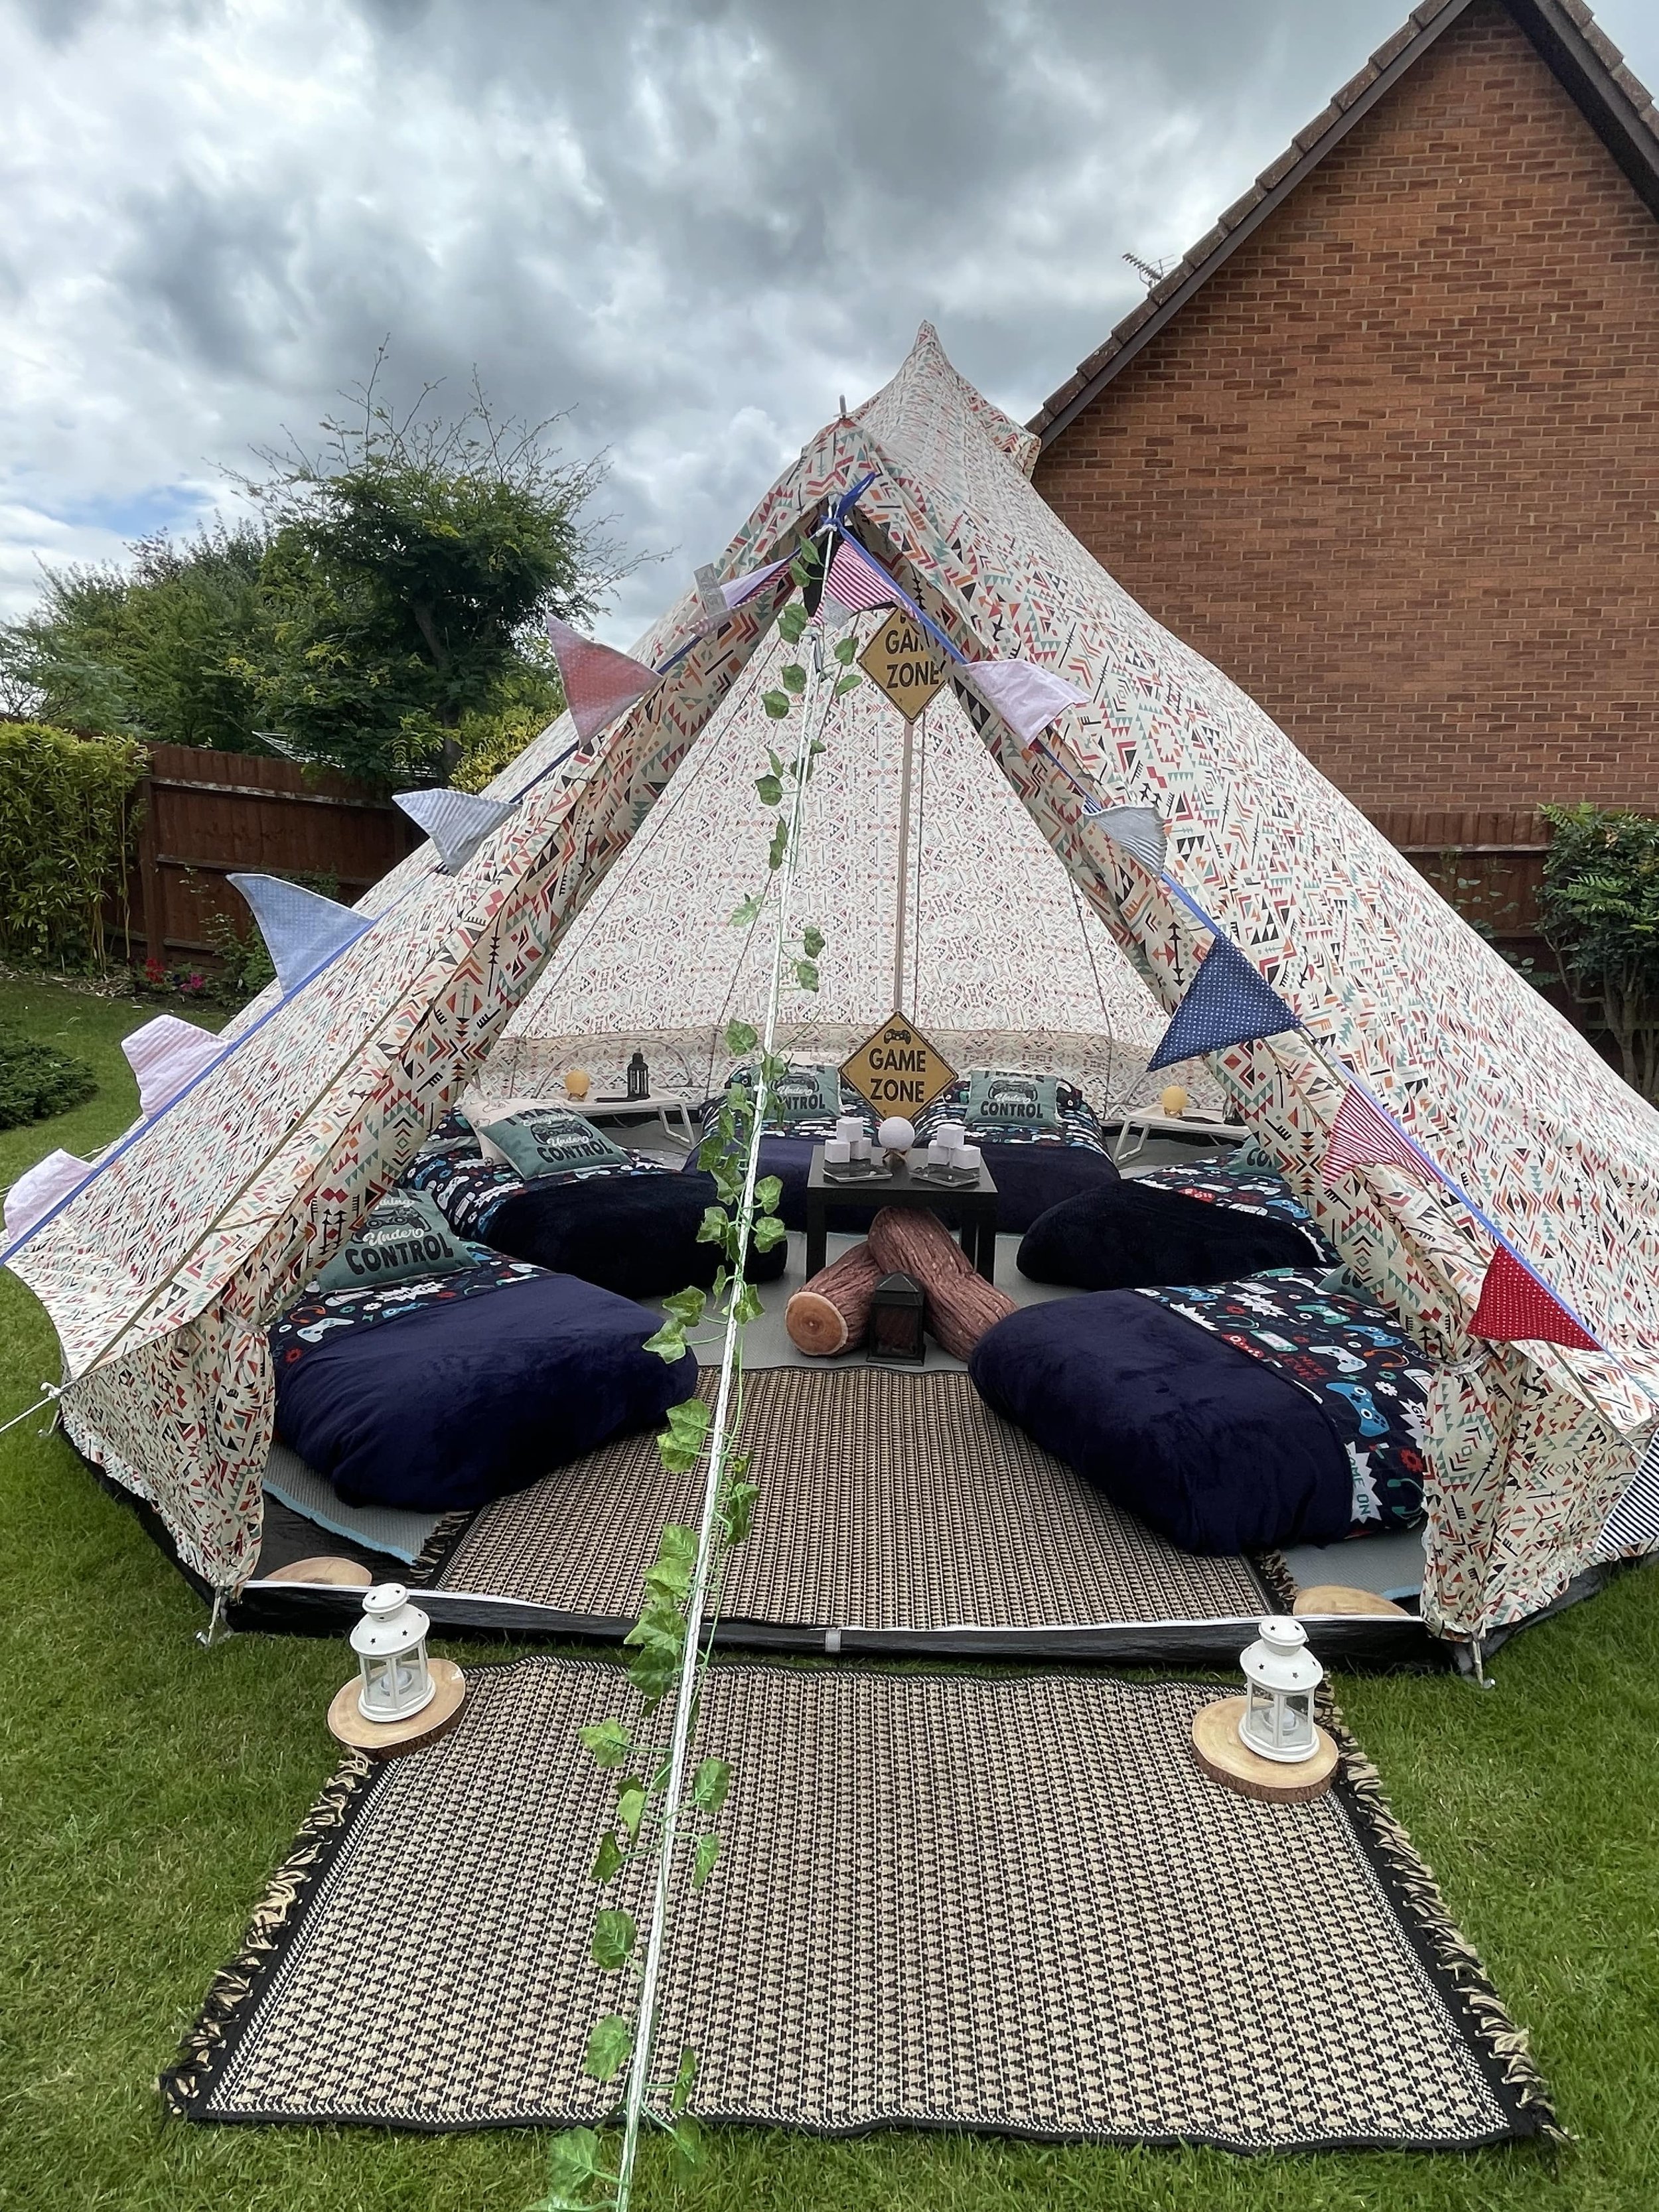 Parteepee Adventures Sleepovers - Sleepover Party Tents in Leicestershire